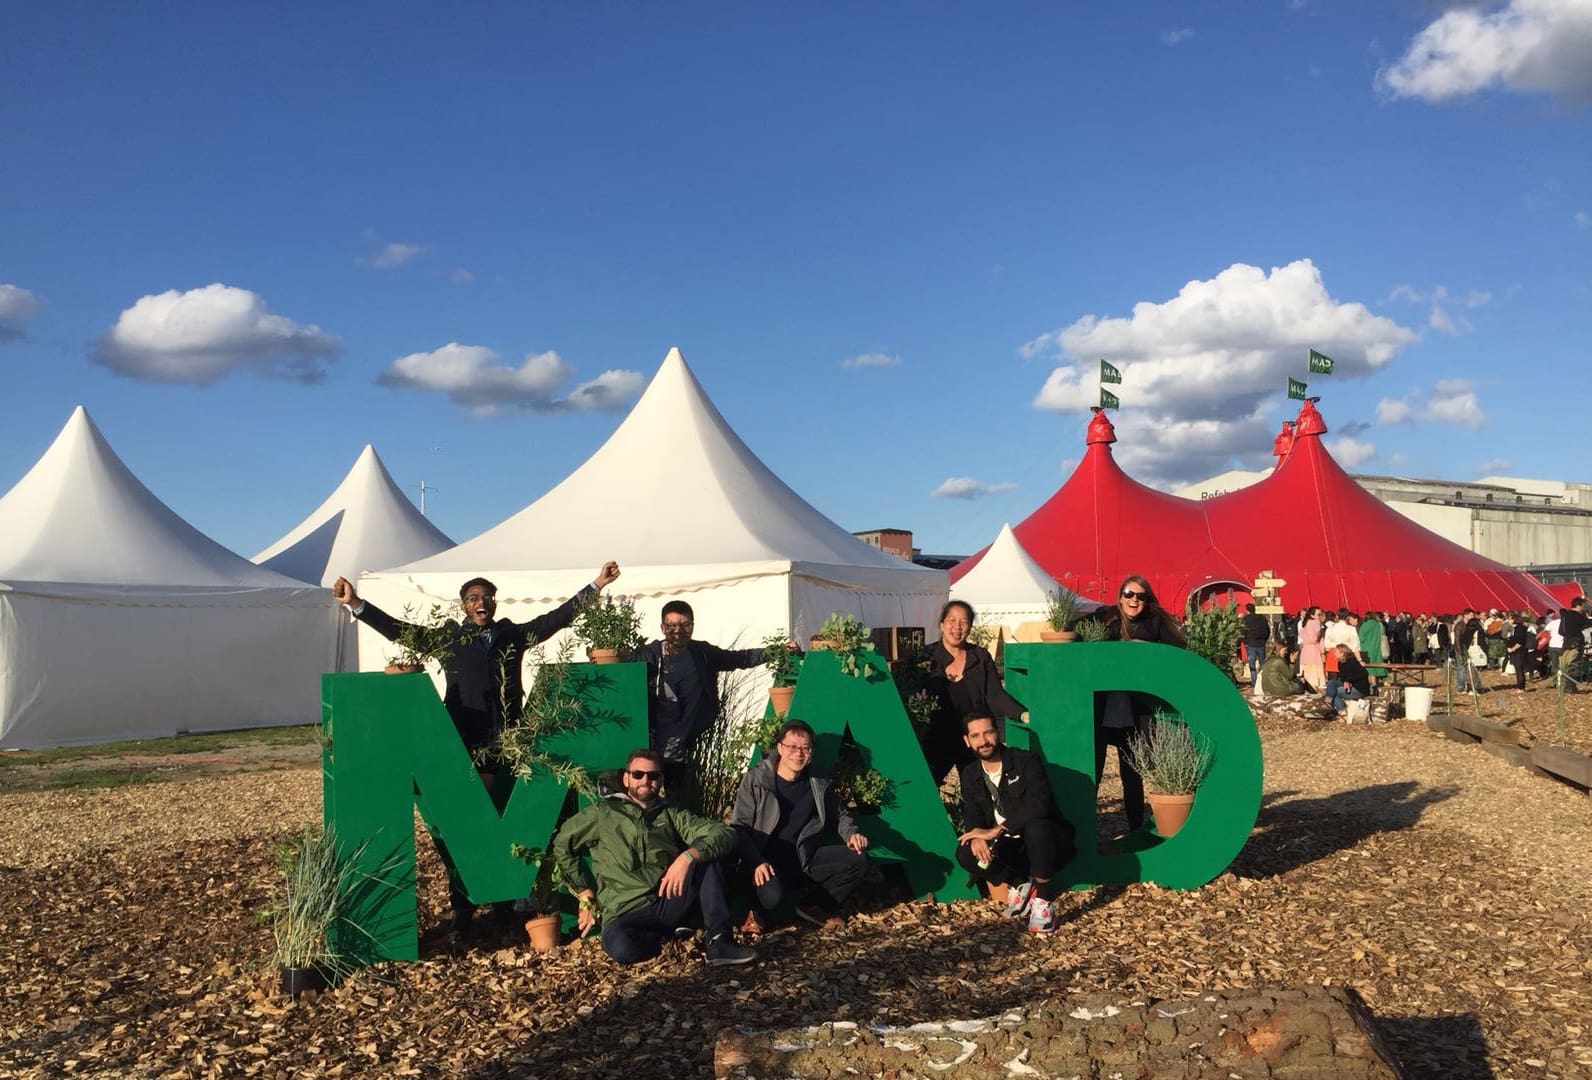 Chef Matthew Britt (front row, left) and other attendees at MAD6 in Copenhagen.